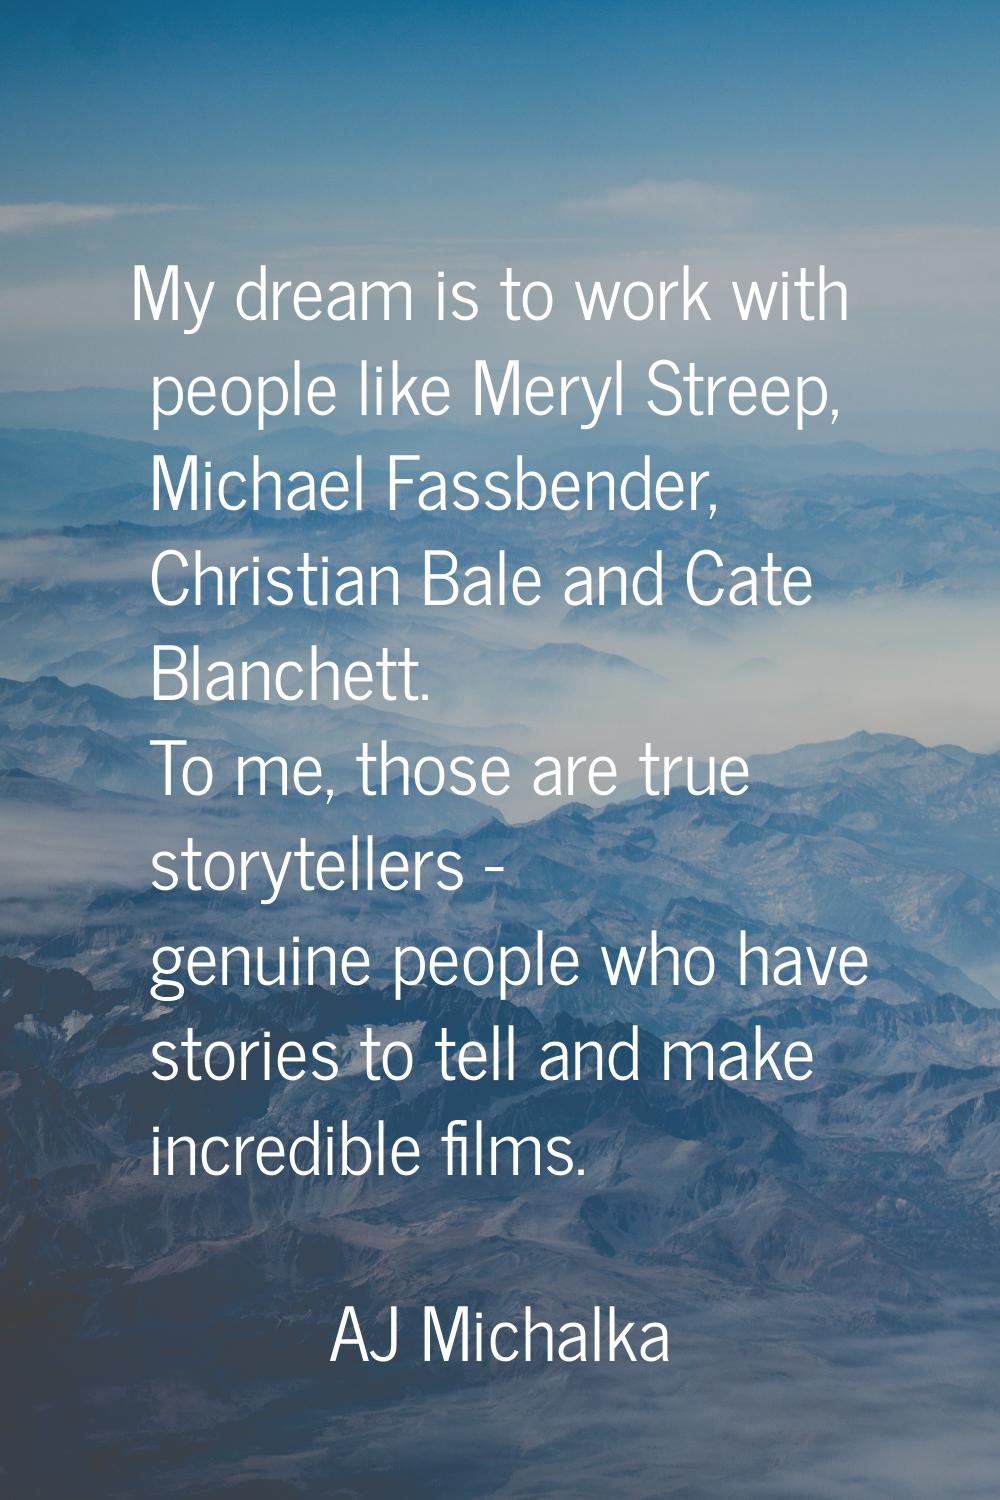 My dream is to work with people like Meryl Streep, Michael Fassbender, Christian Bale and Cate Blan